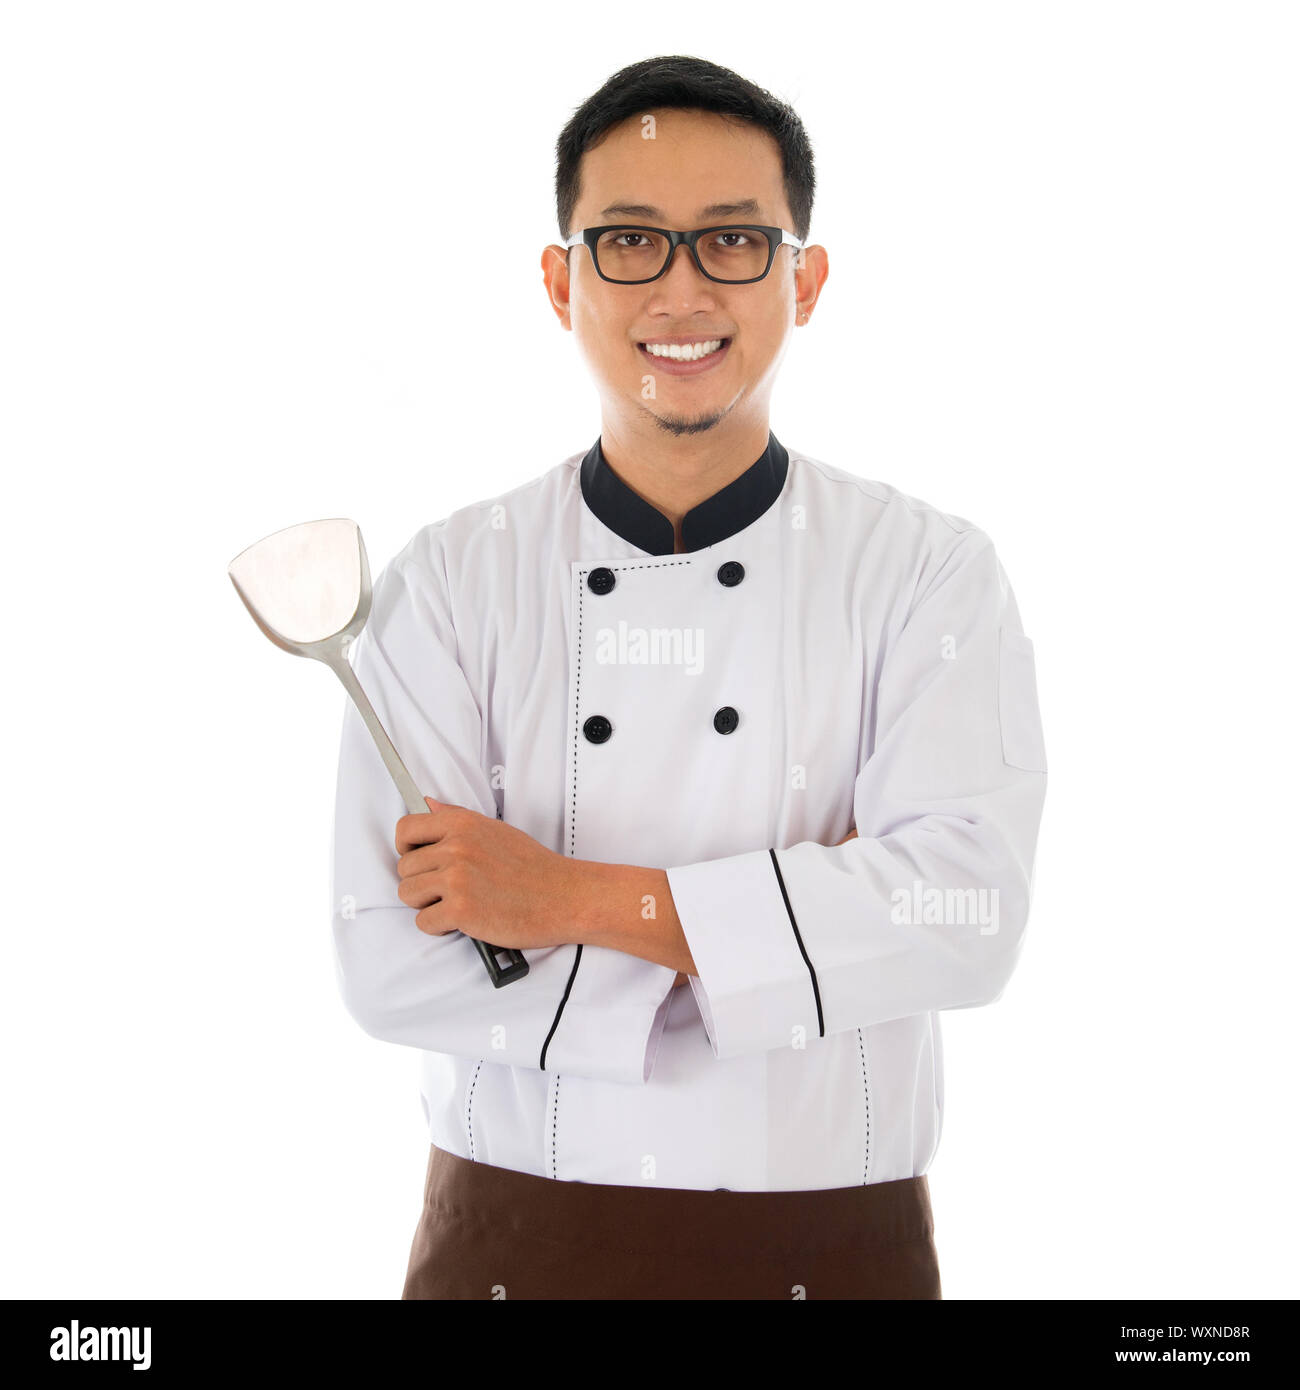 Portrait of Asian chef holding spatula, smiling and standing isolated on white background. Stock Photo